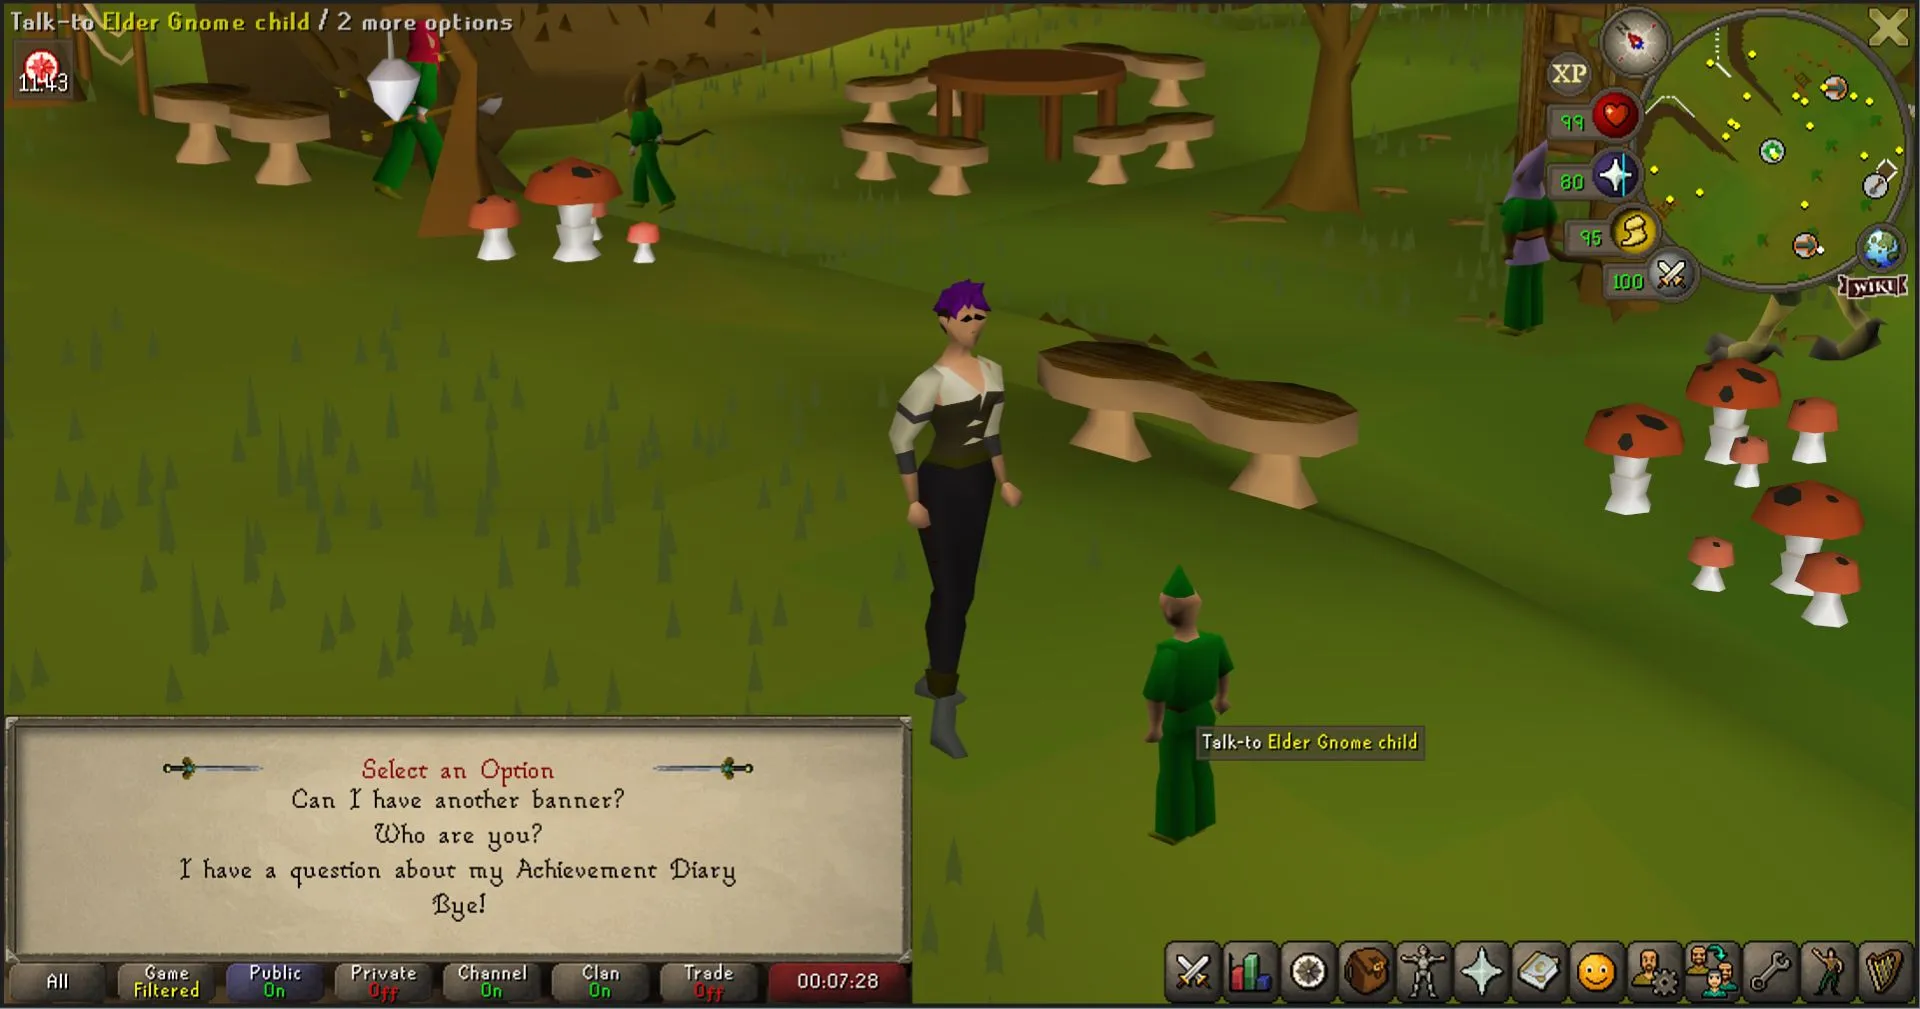 OSRS player speaking to the Elder Gnome Child in the Gnome Stronghold.